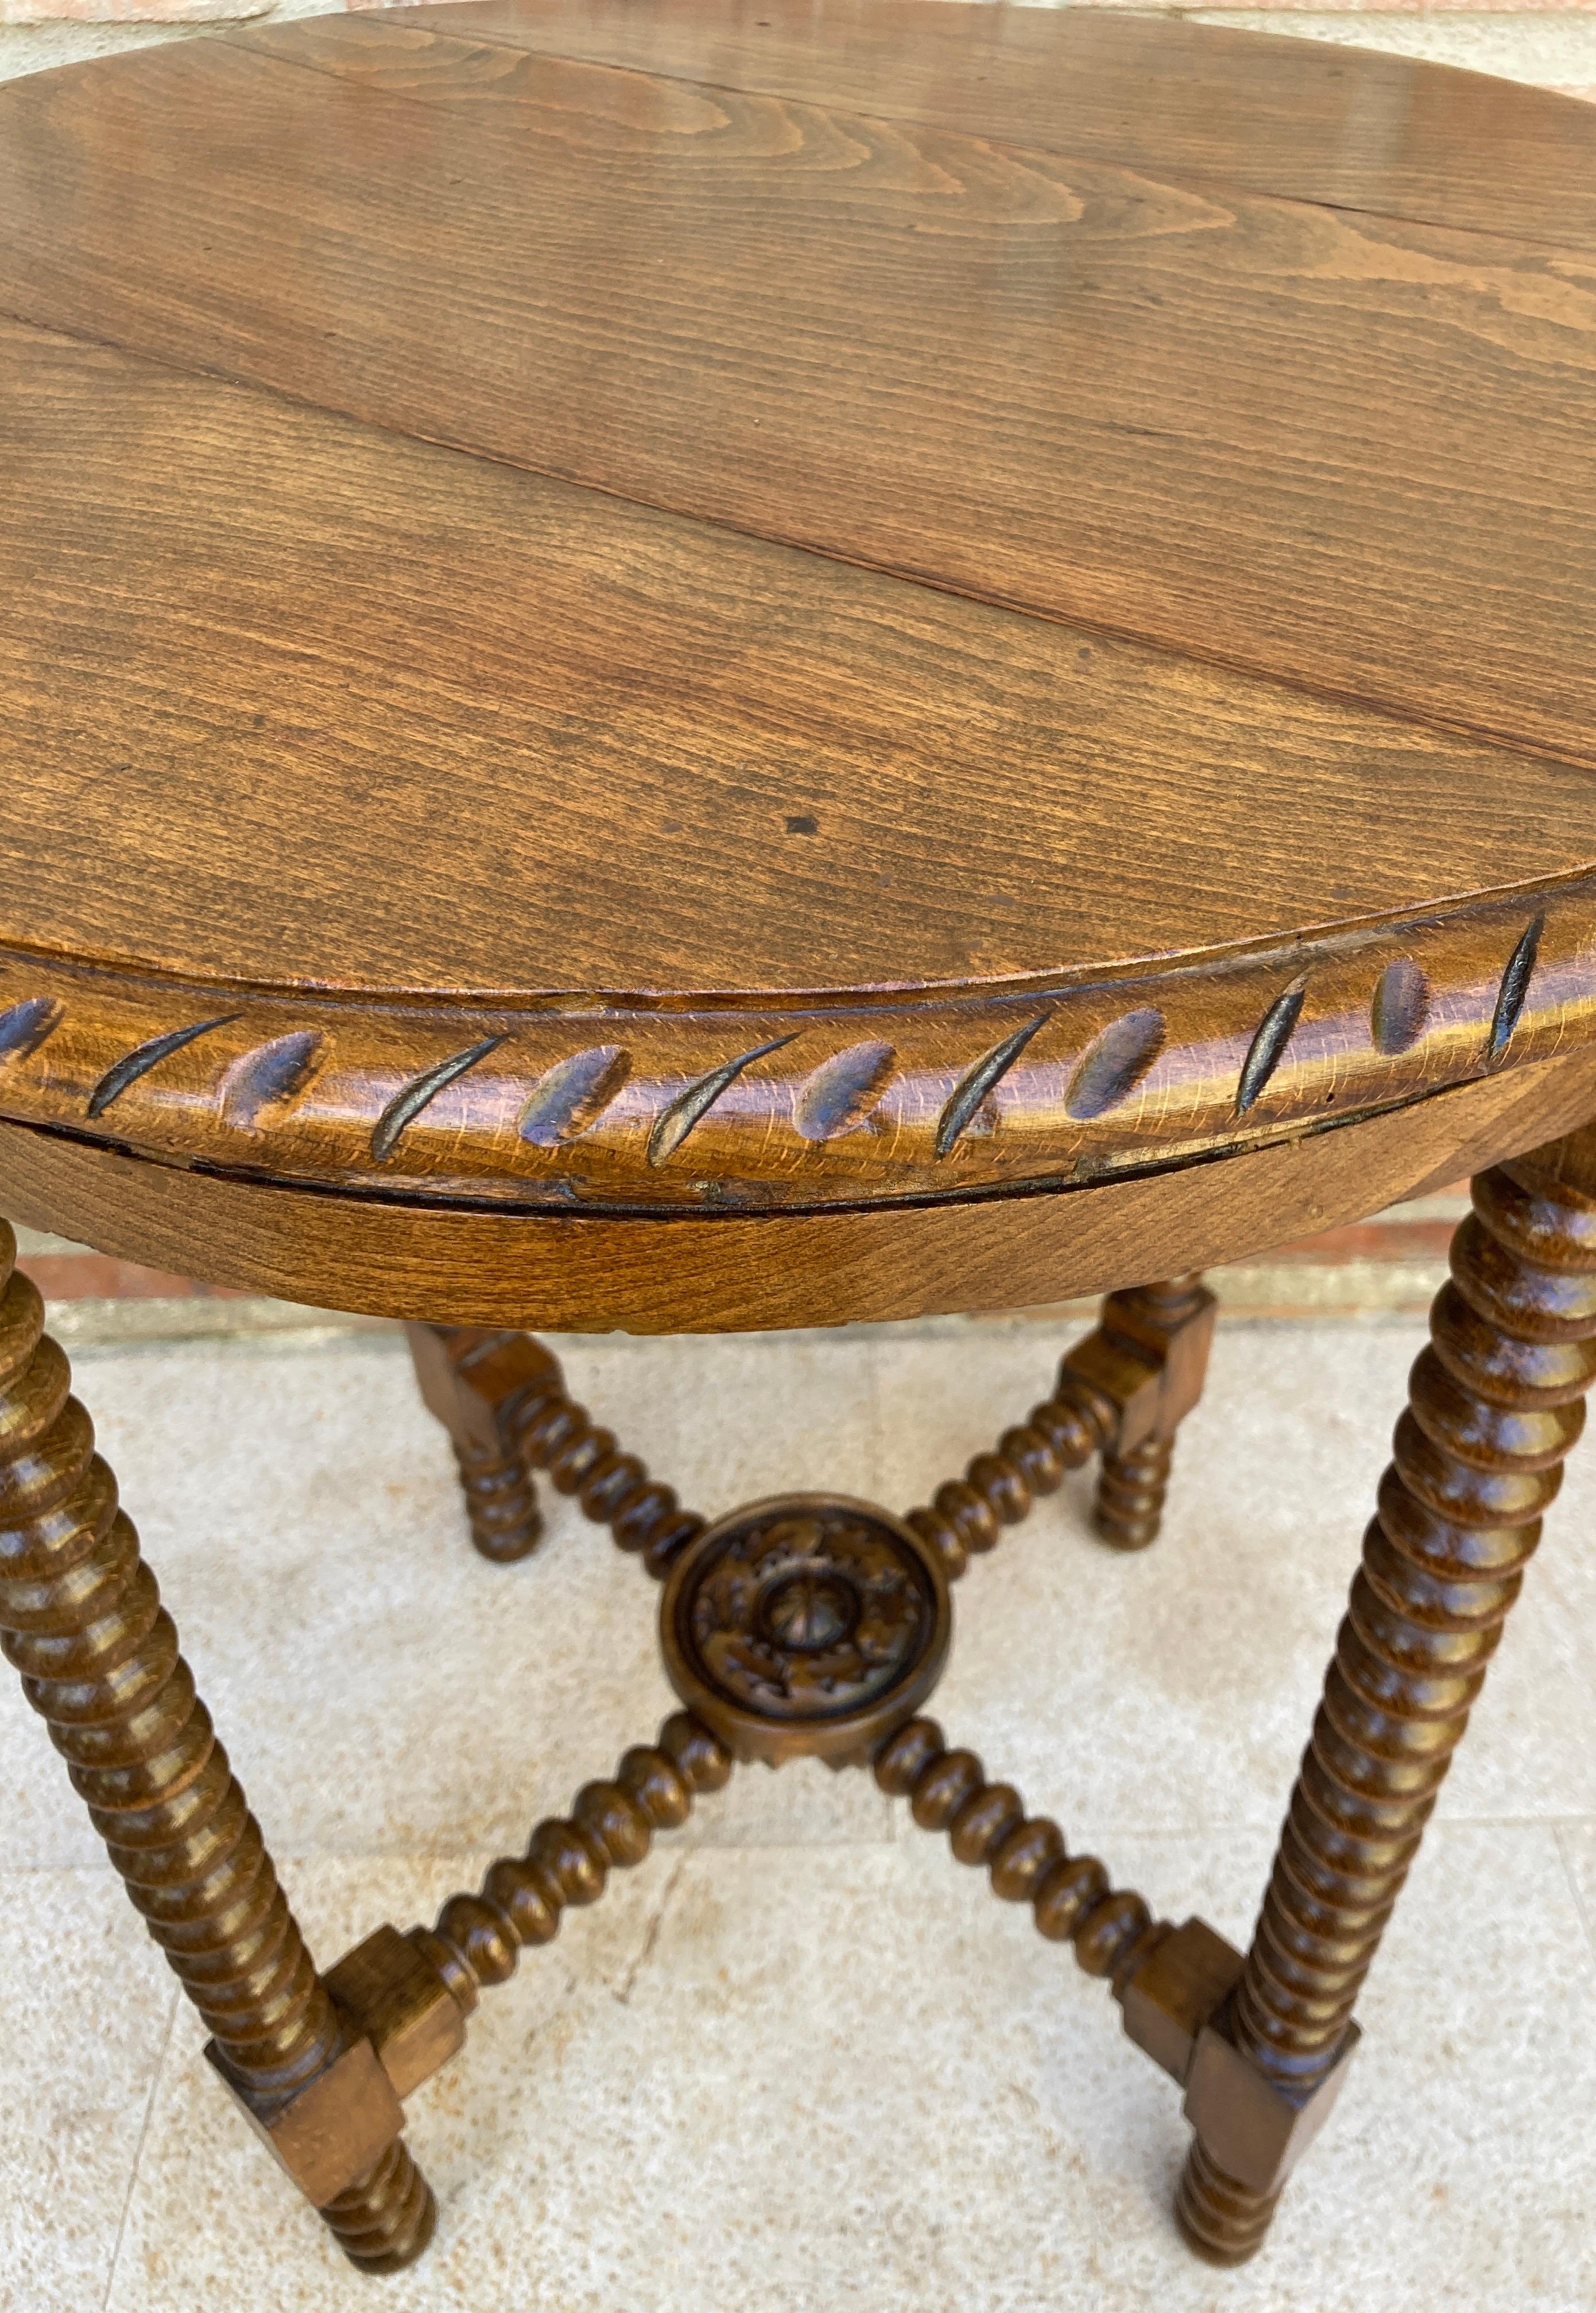 Spanish Round Walnut Side Table With Turned Legs And Beleveled Edges 1900s 1